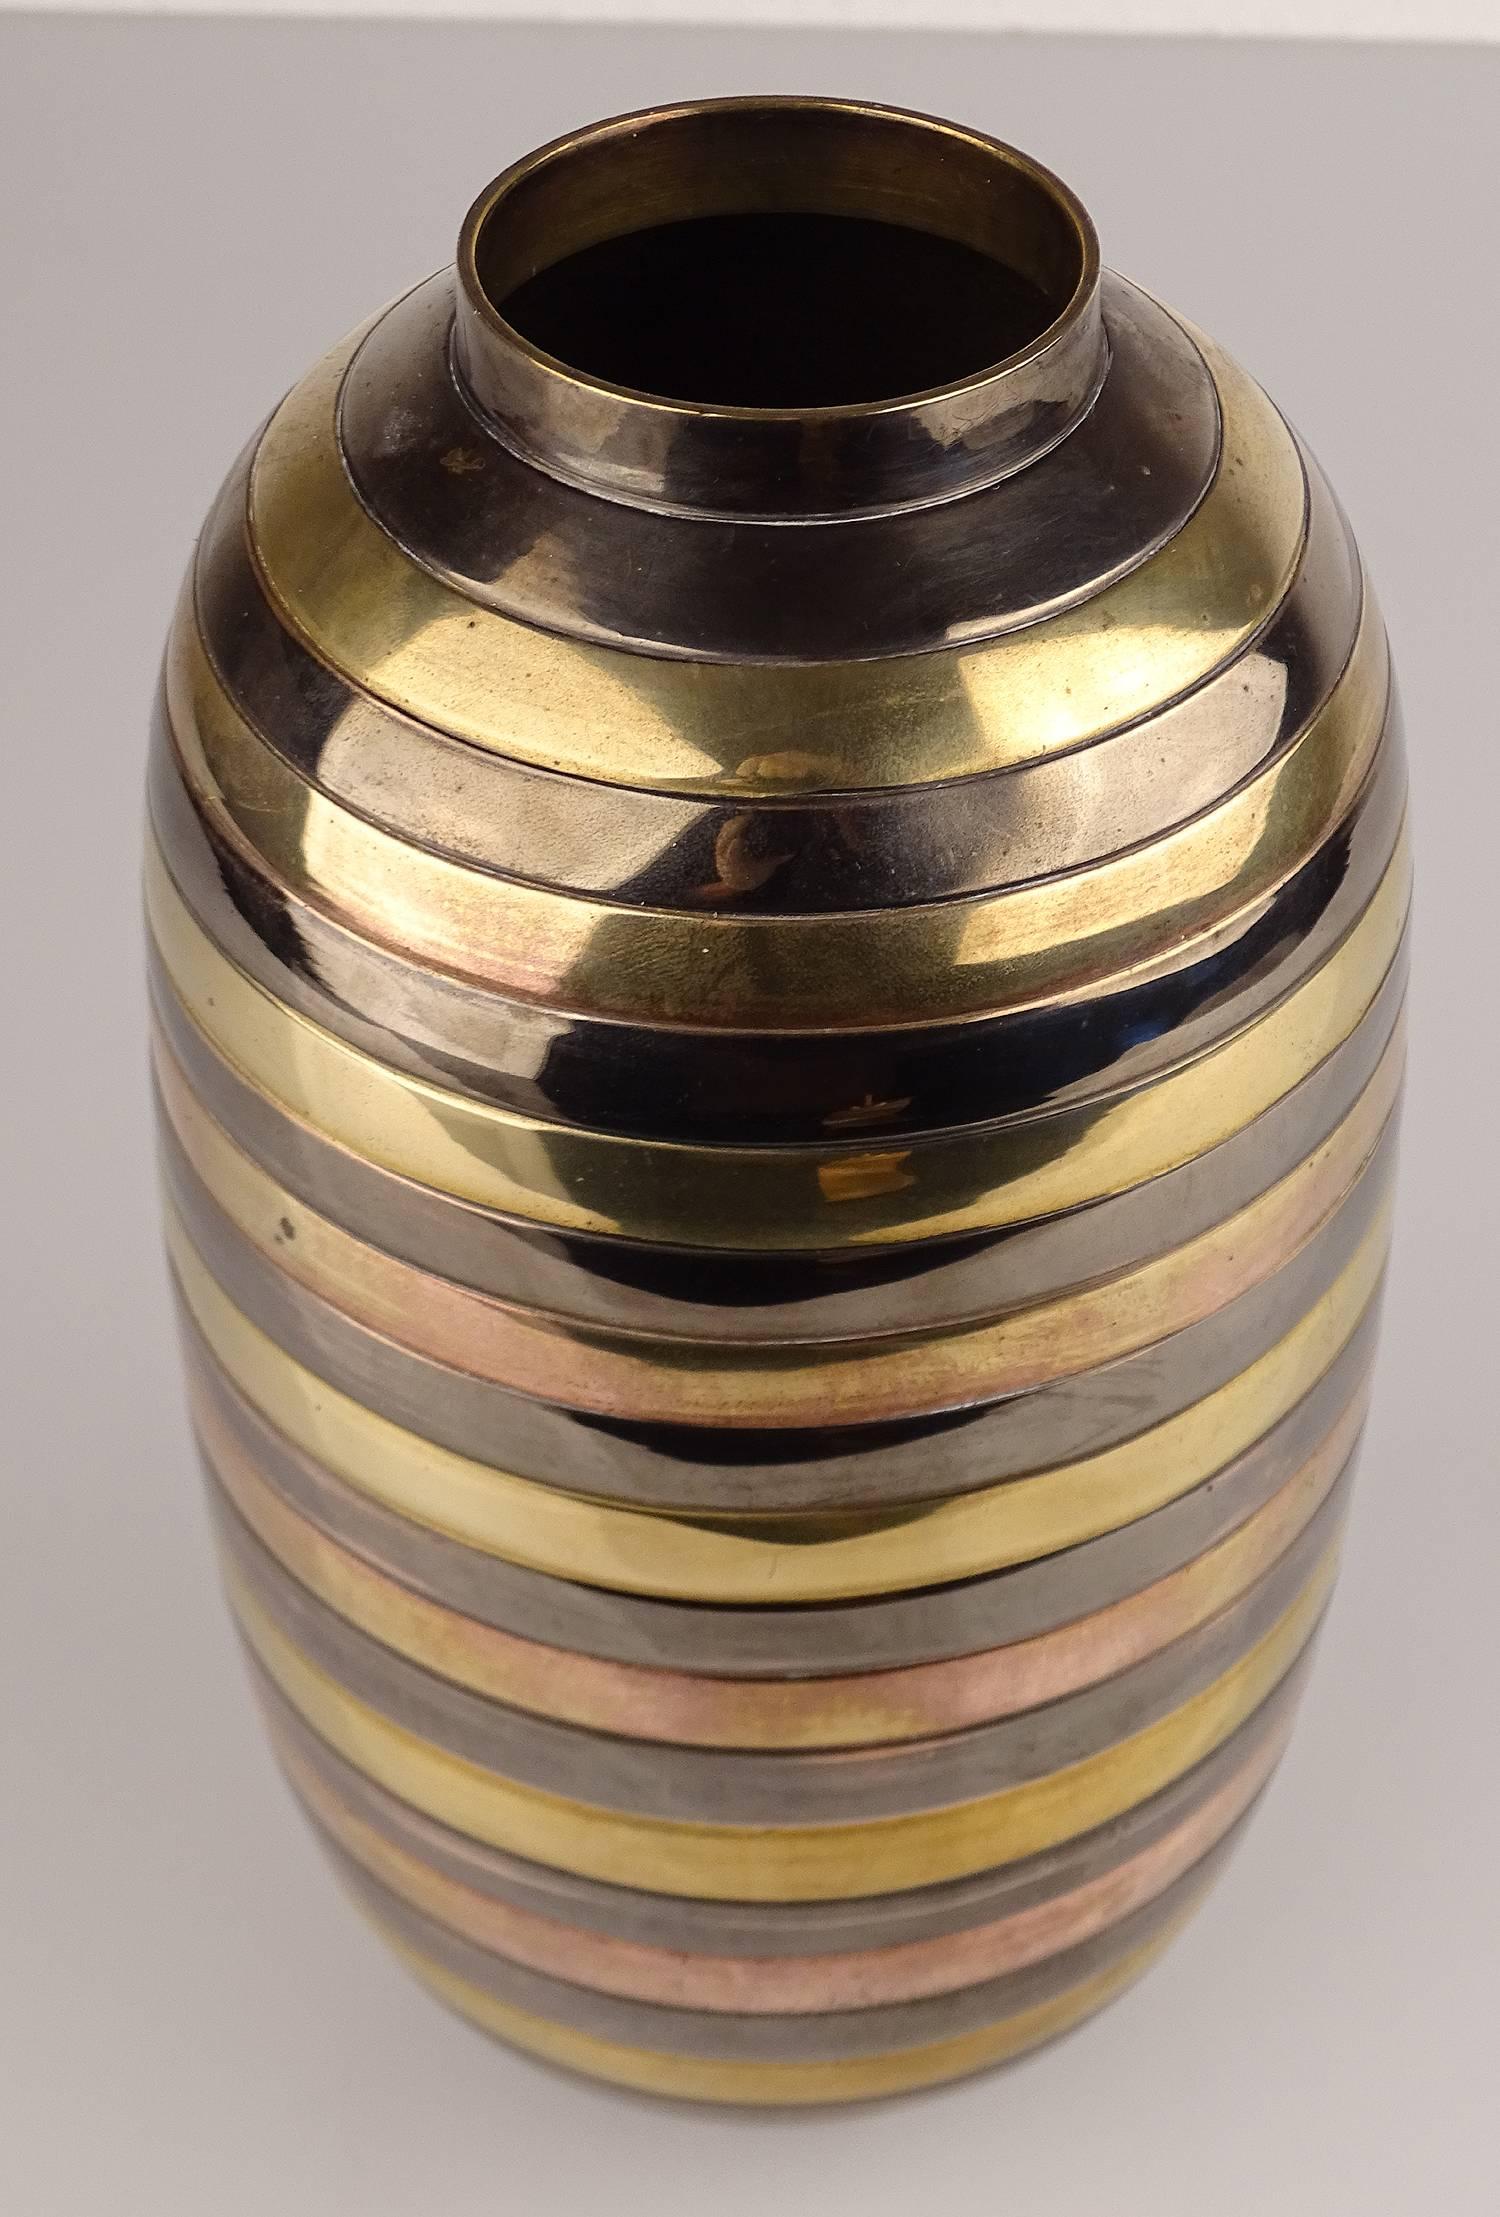 Mid-20th Century Art Deco Style Solid Brass Vase with Copper and Bronze Accents